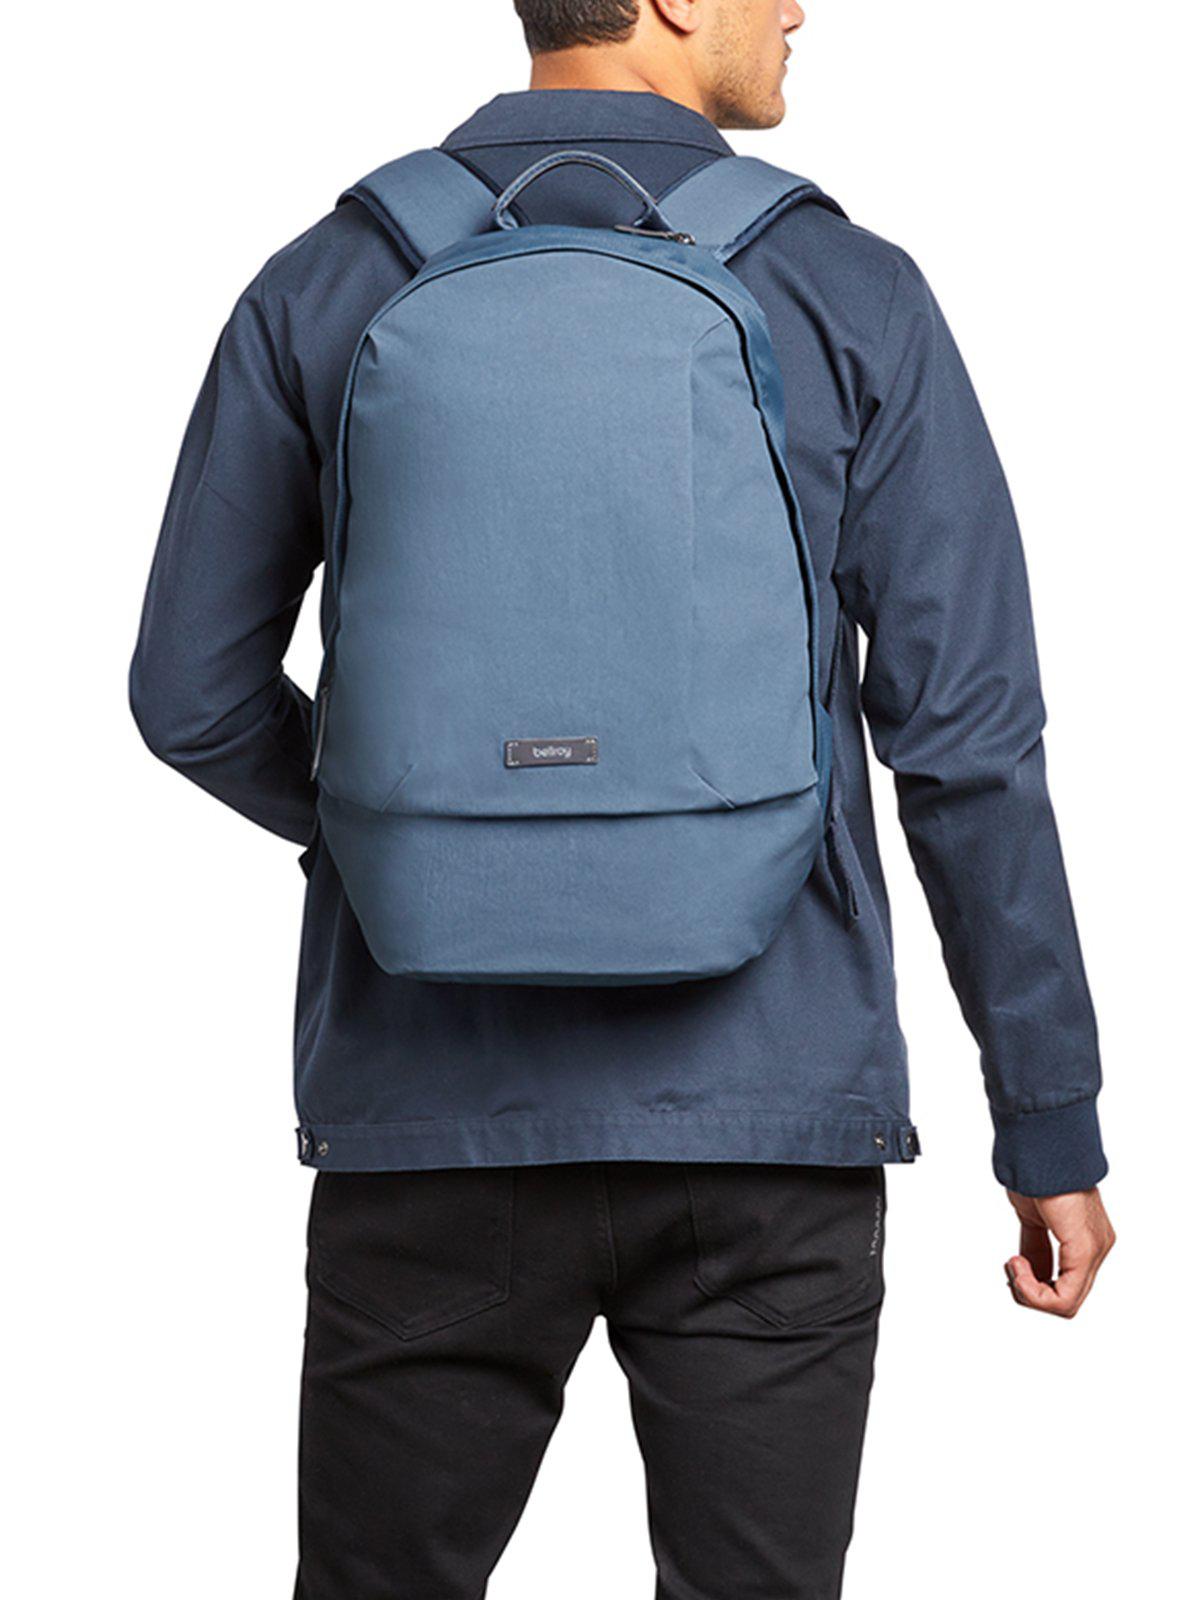 Bellroy Classic Backpack Navy